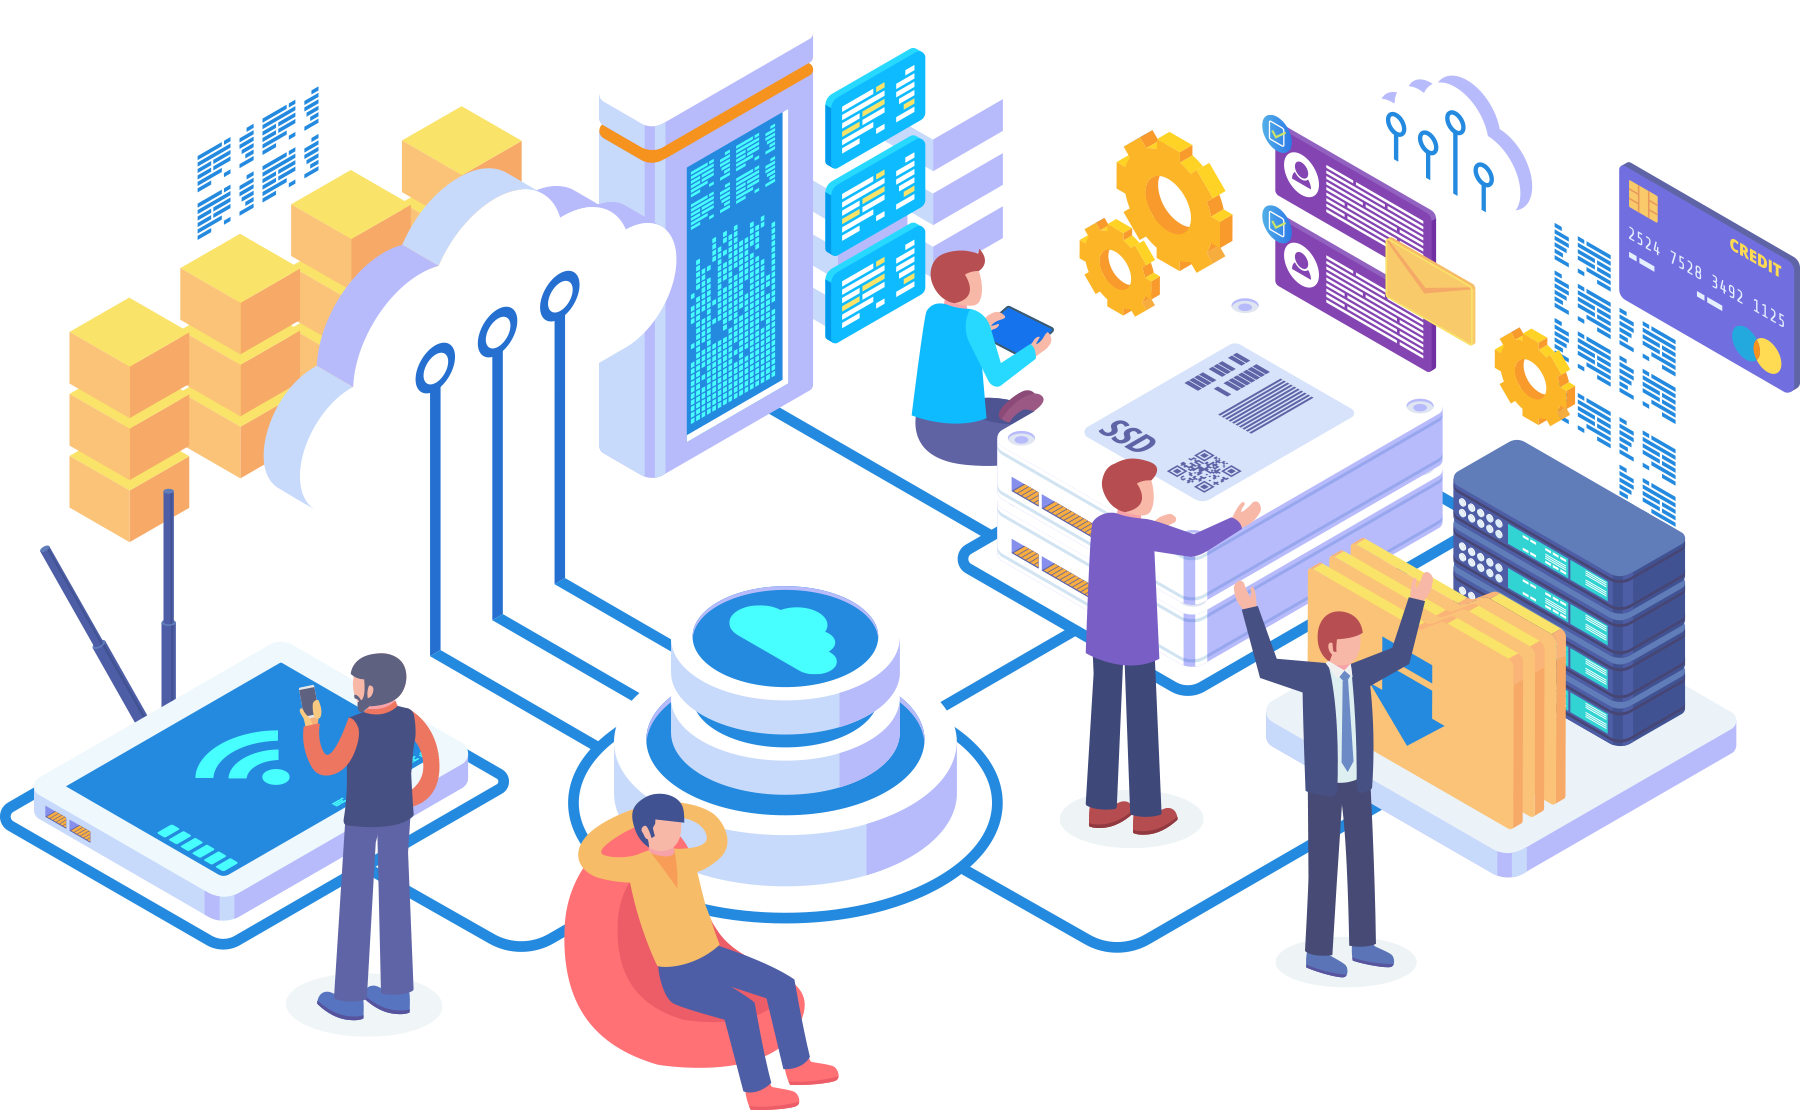 elements-isometric-distributed-cloud-vector-concept-24V2XK7-2020-01-18.png